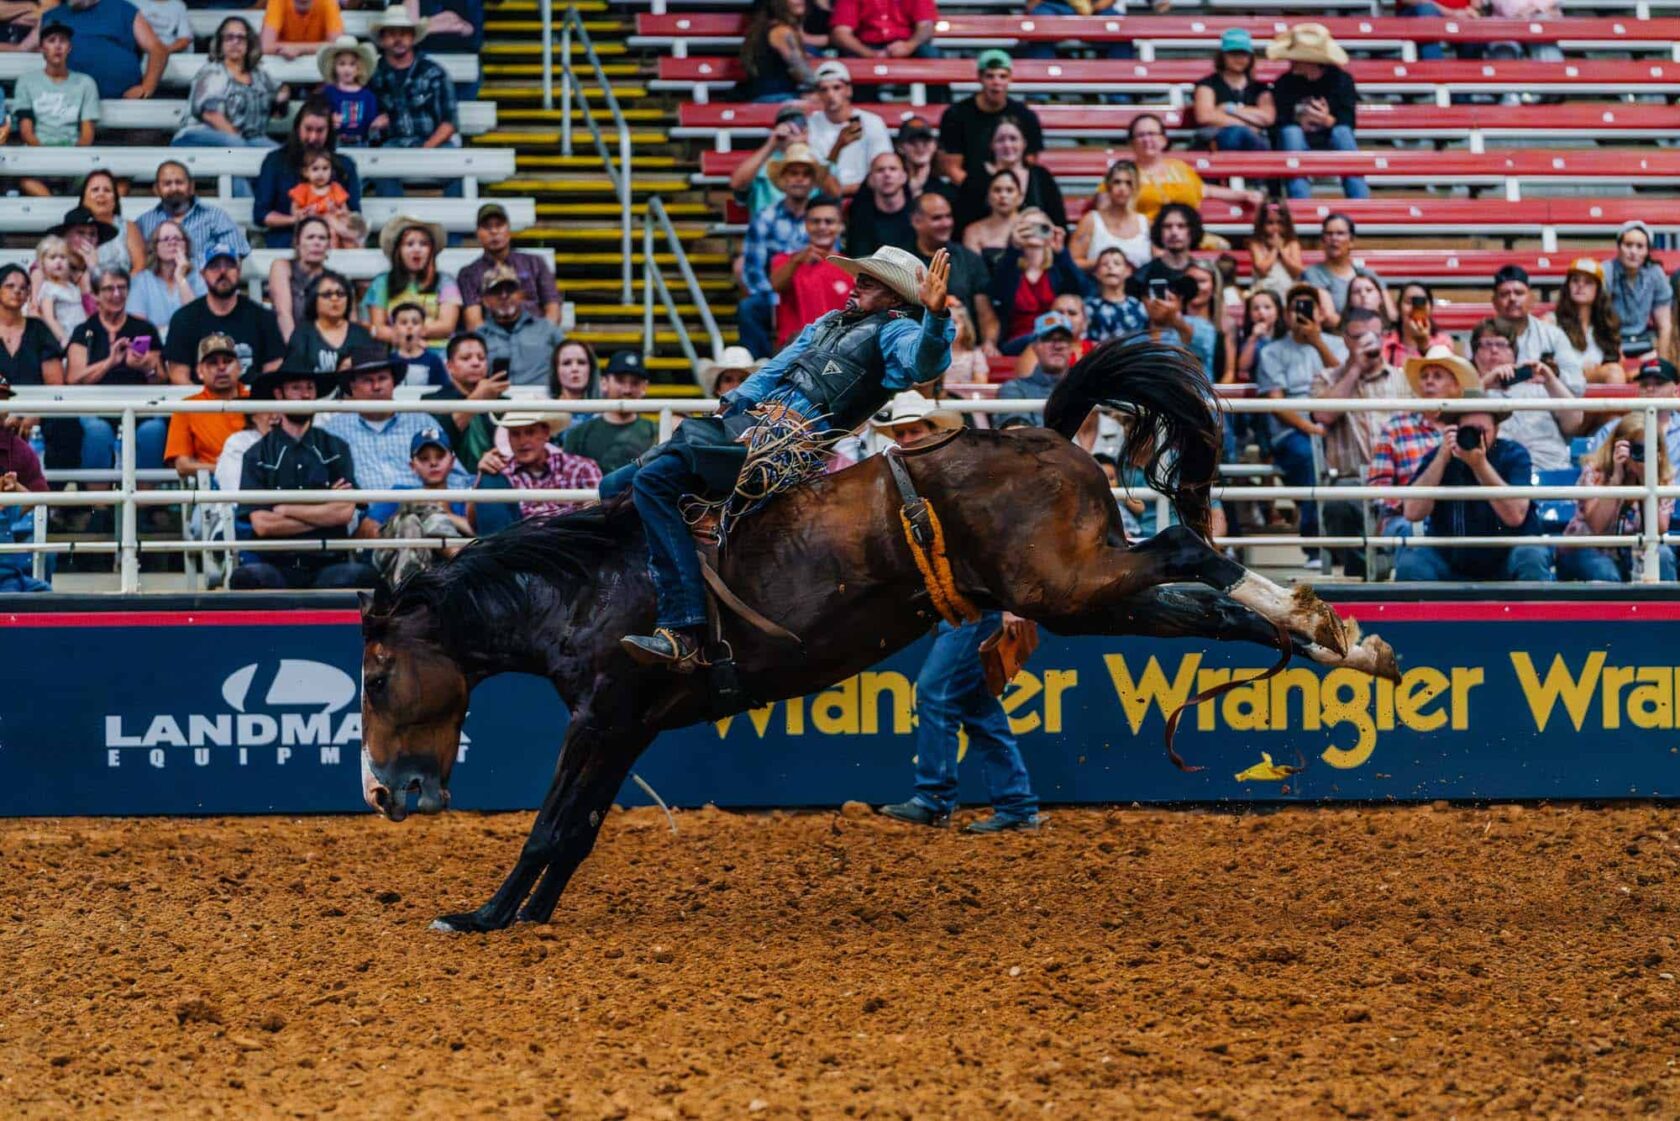 A man riding a horse at a rodeo.